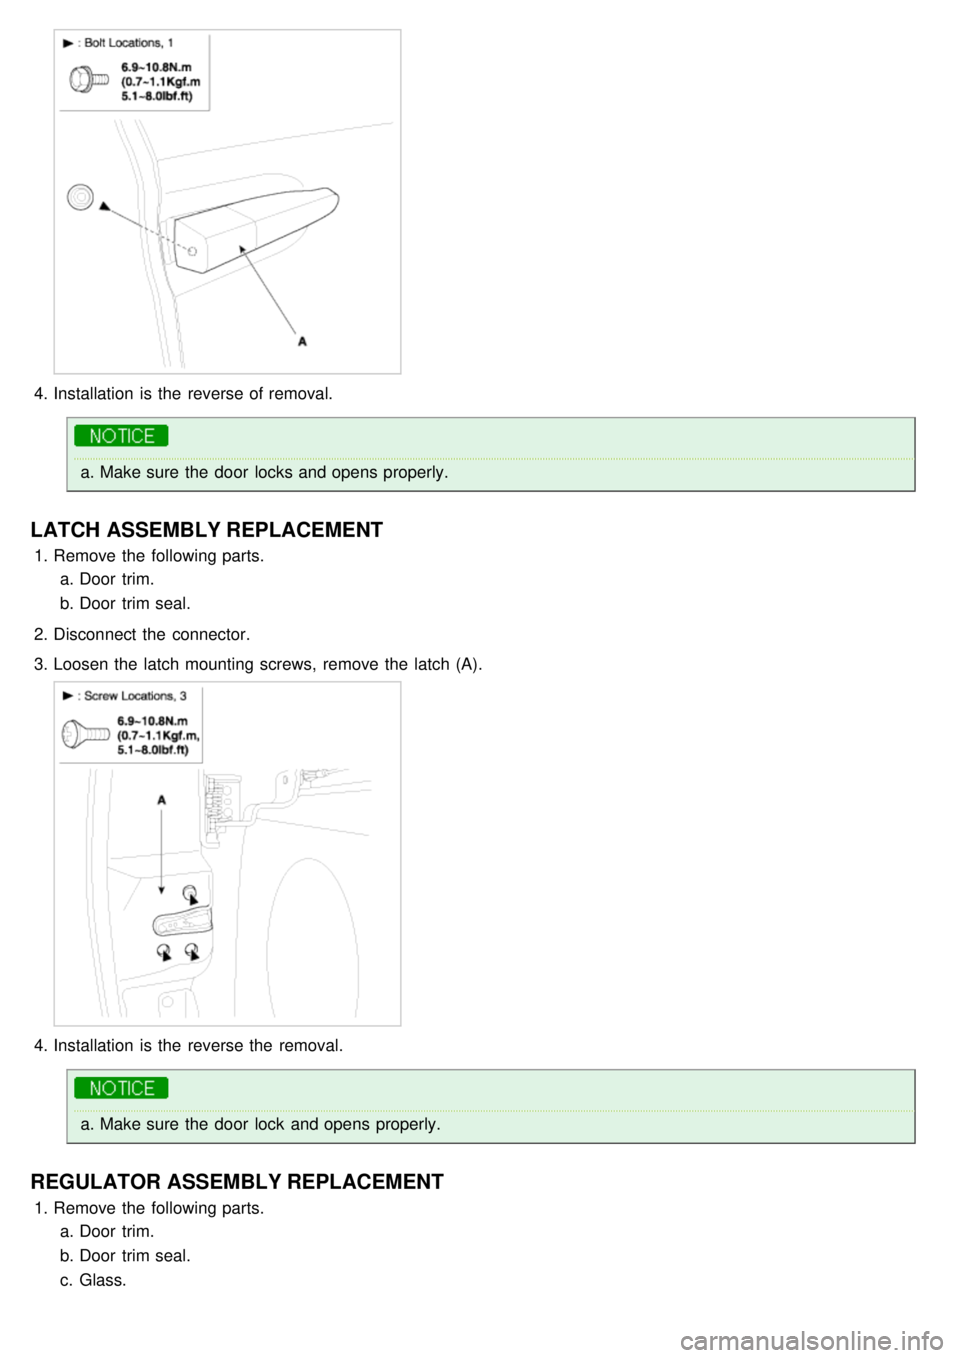 KIA CARNIVAL 2007  Workshop Manual 4.Installation  is the  reverse of removal.
a.Make sure  the  door  locks and opens properly.
LATCH ASSEMBLY REPLACEMENT
1.Remove the  following parts.
a. Door  trim.
b. Door  trim seal.
2. Disconnect